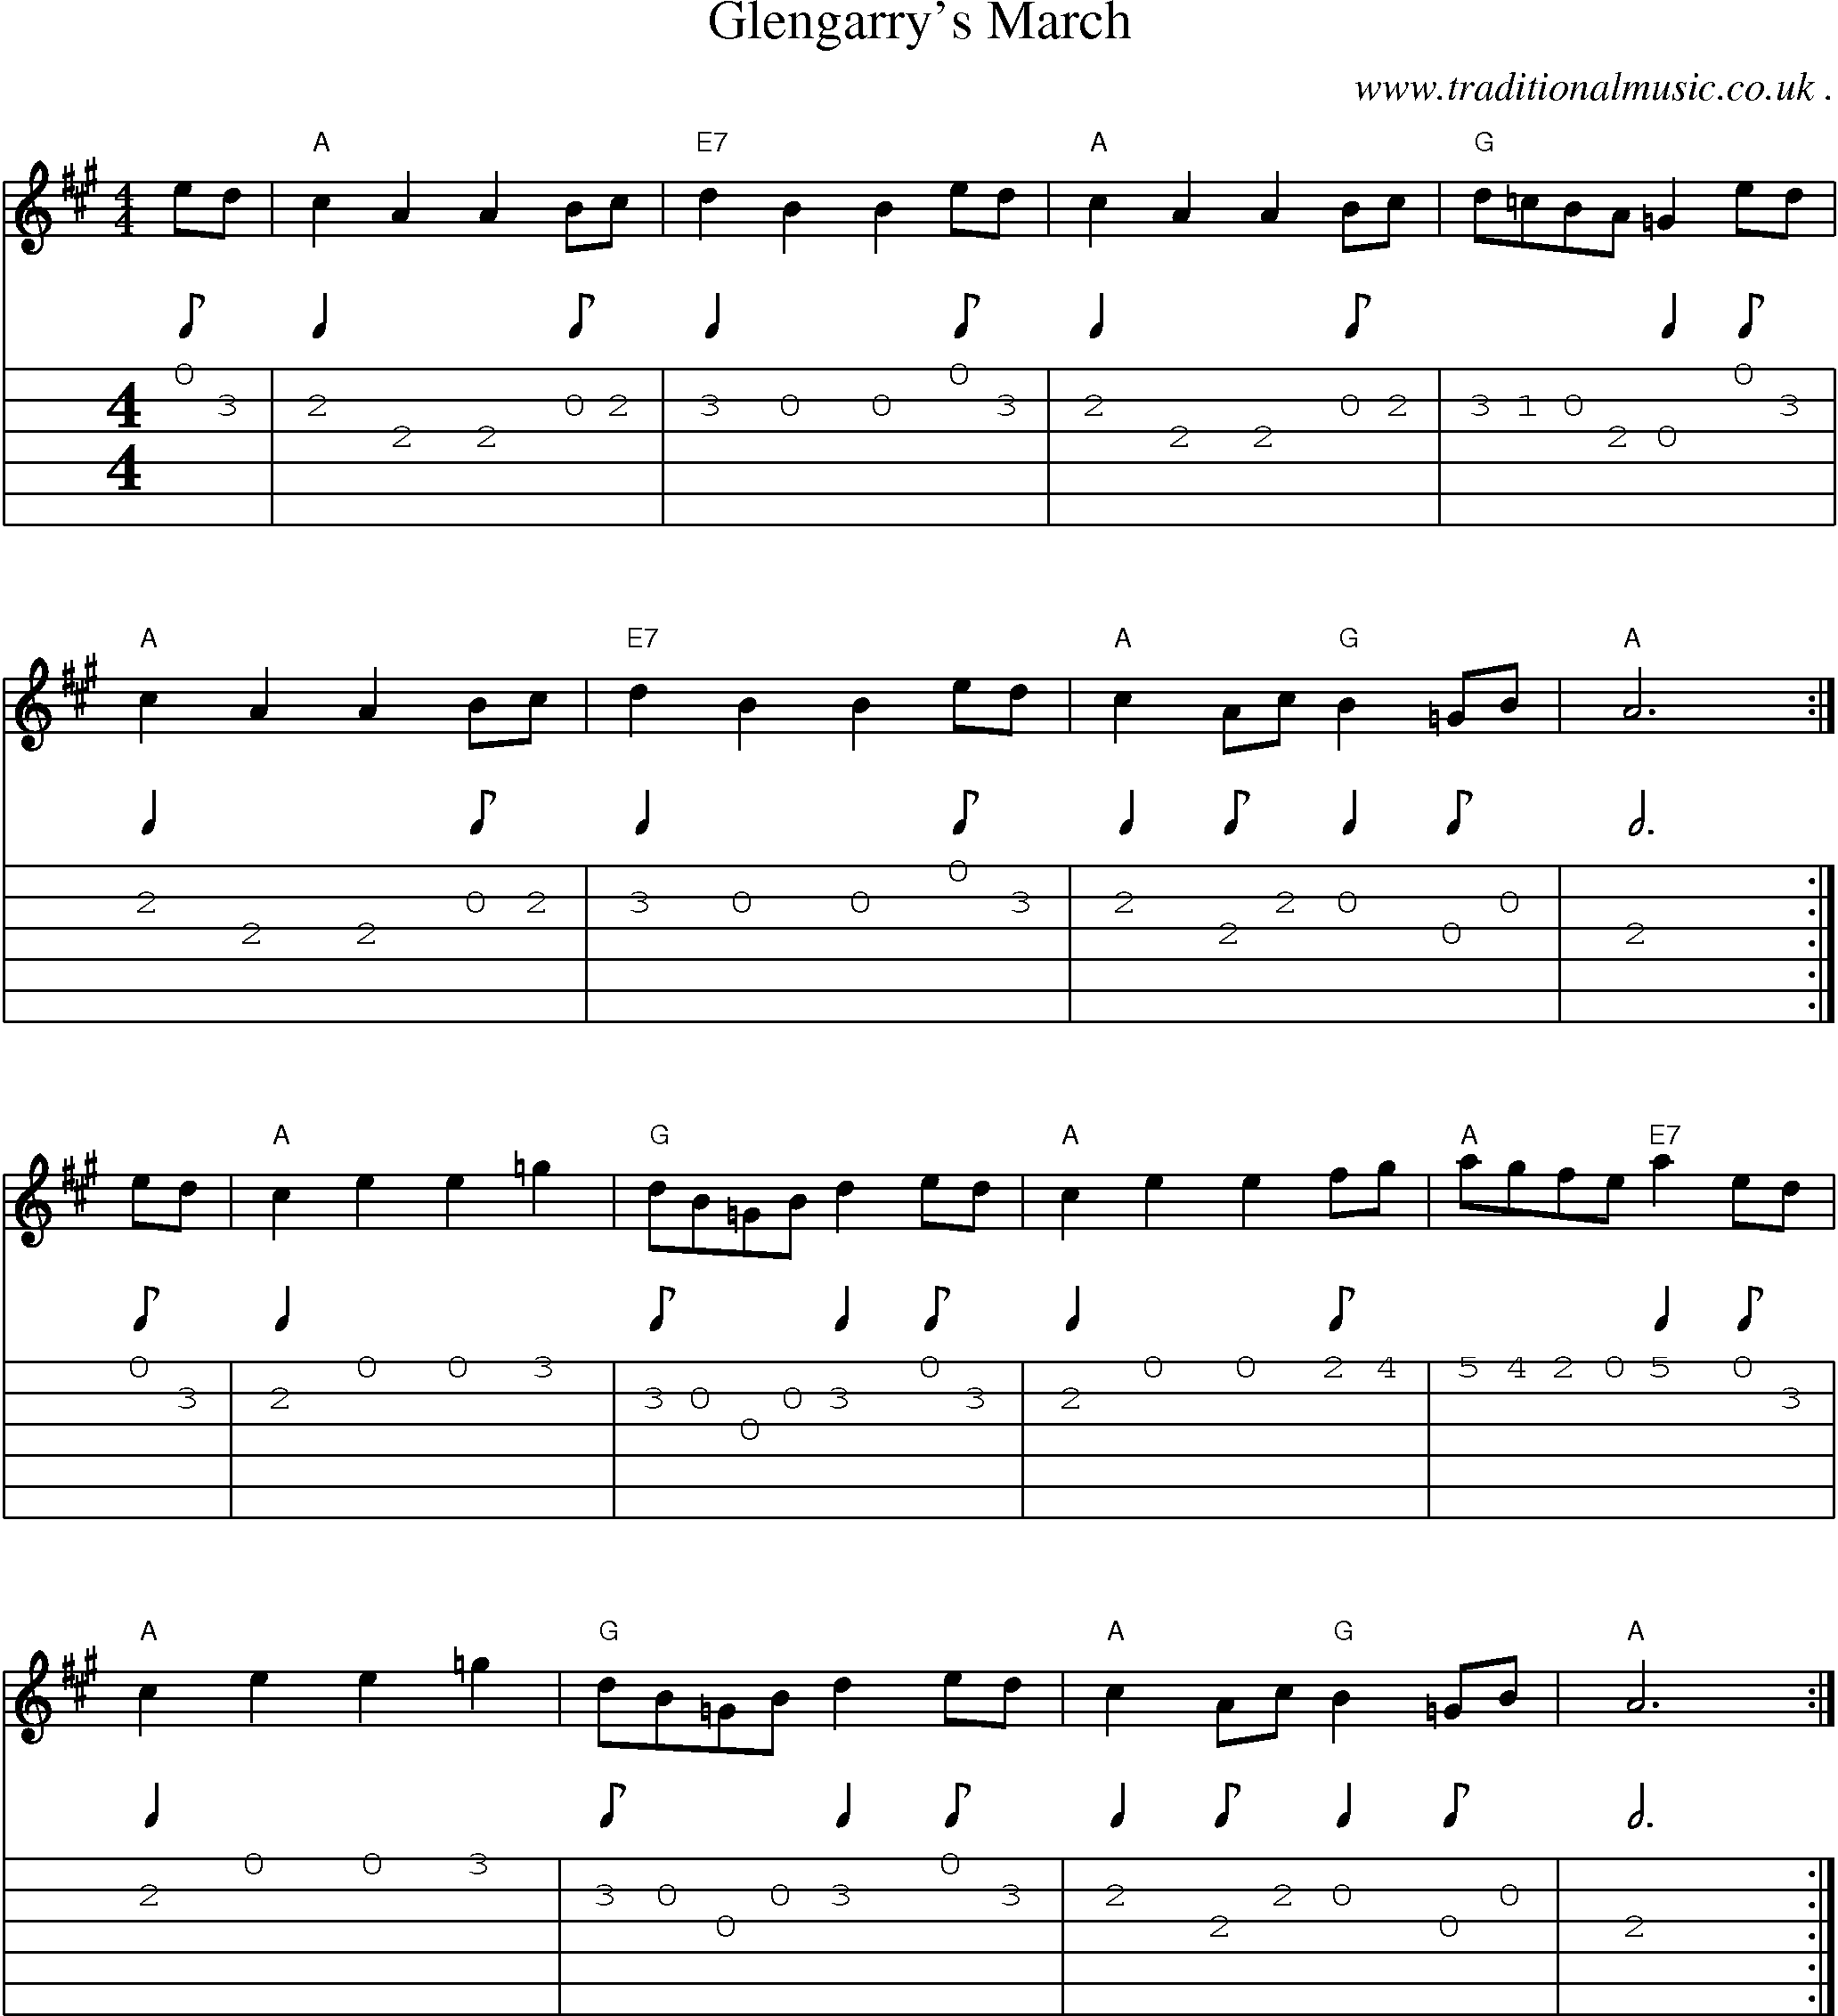 Sheet-Music and Guitar Tabs for Glengarrys March